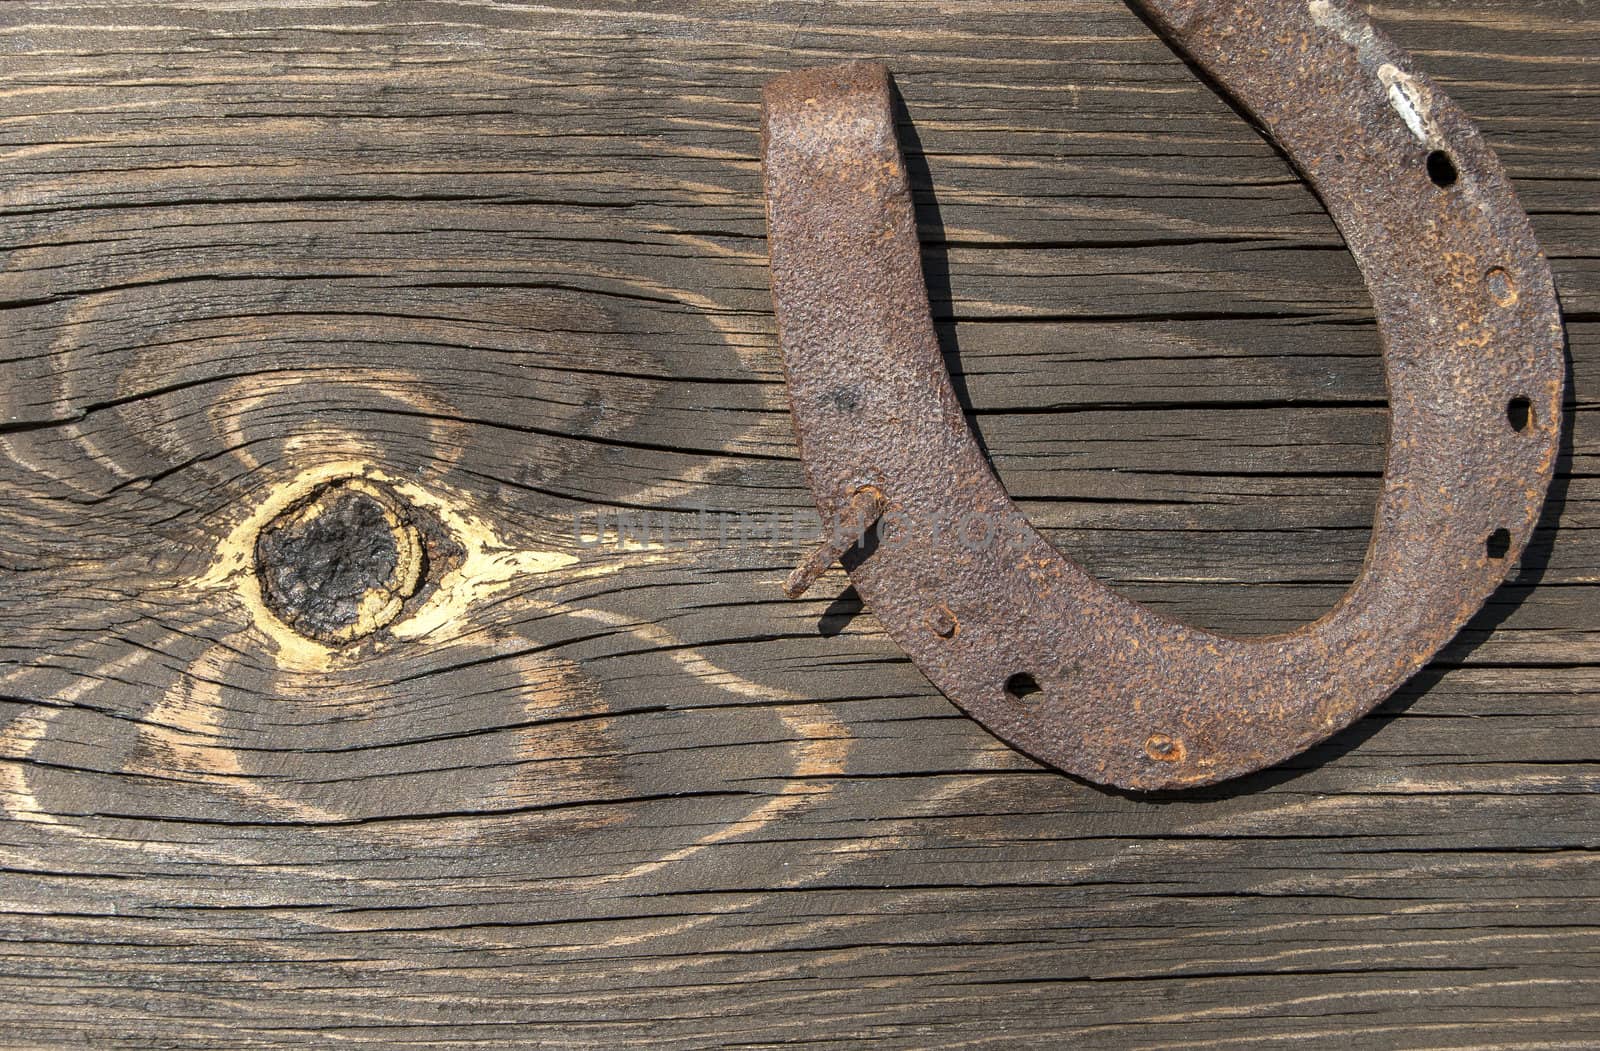 Old weathered wooden board with knurl and rusty horseshoe